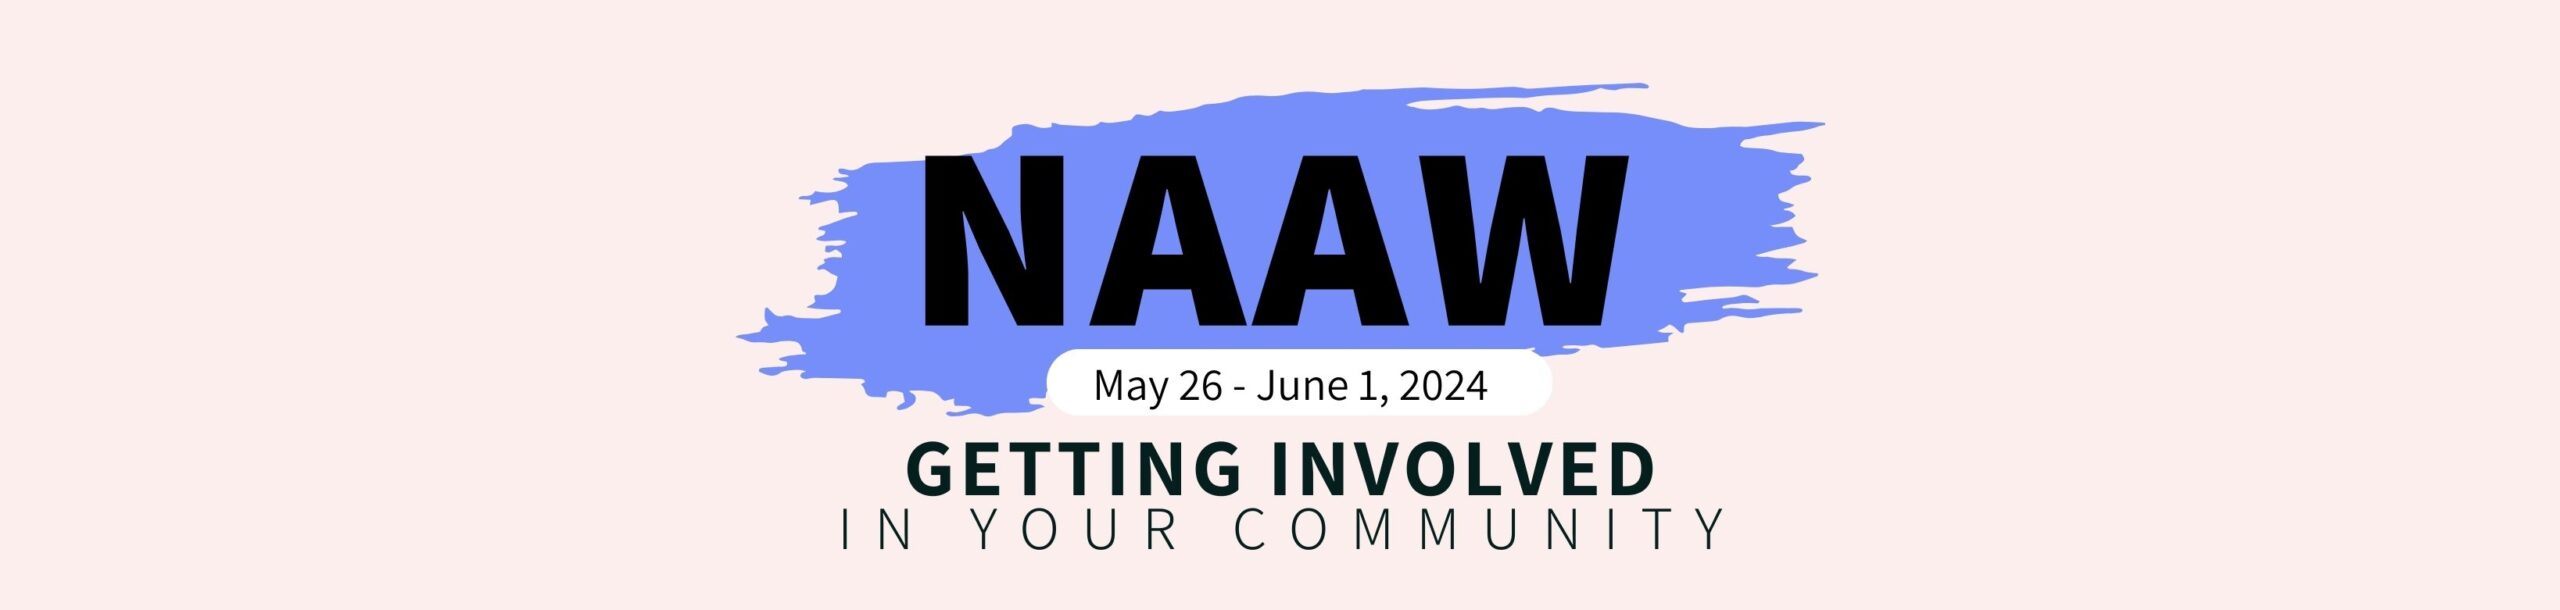 NAAW – Getting Involved in Your Community